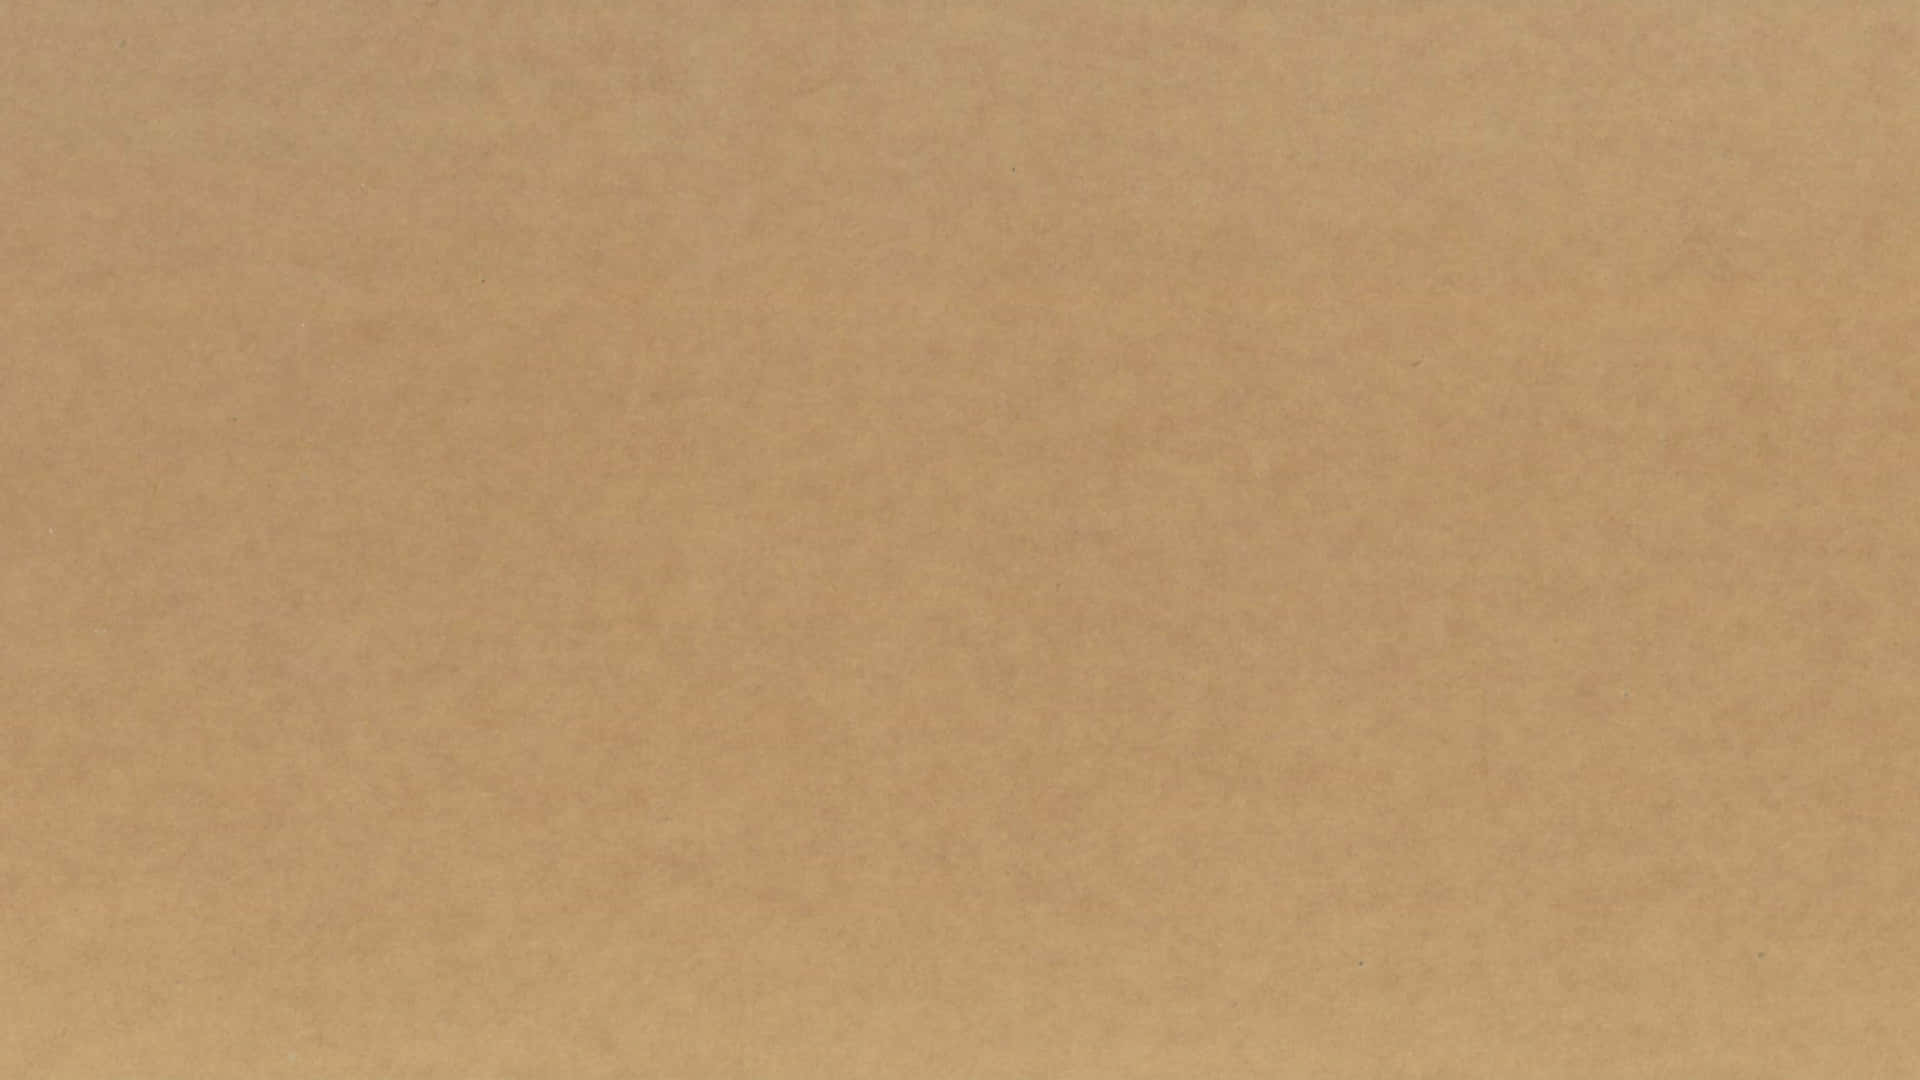 A texture of brown cardboard